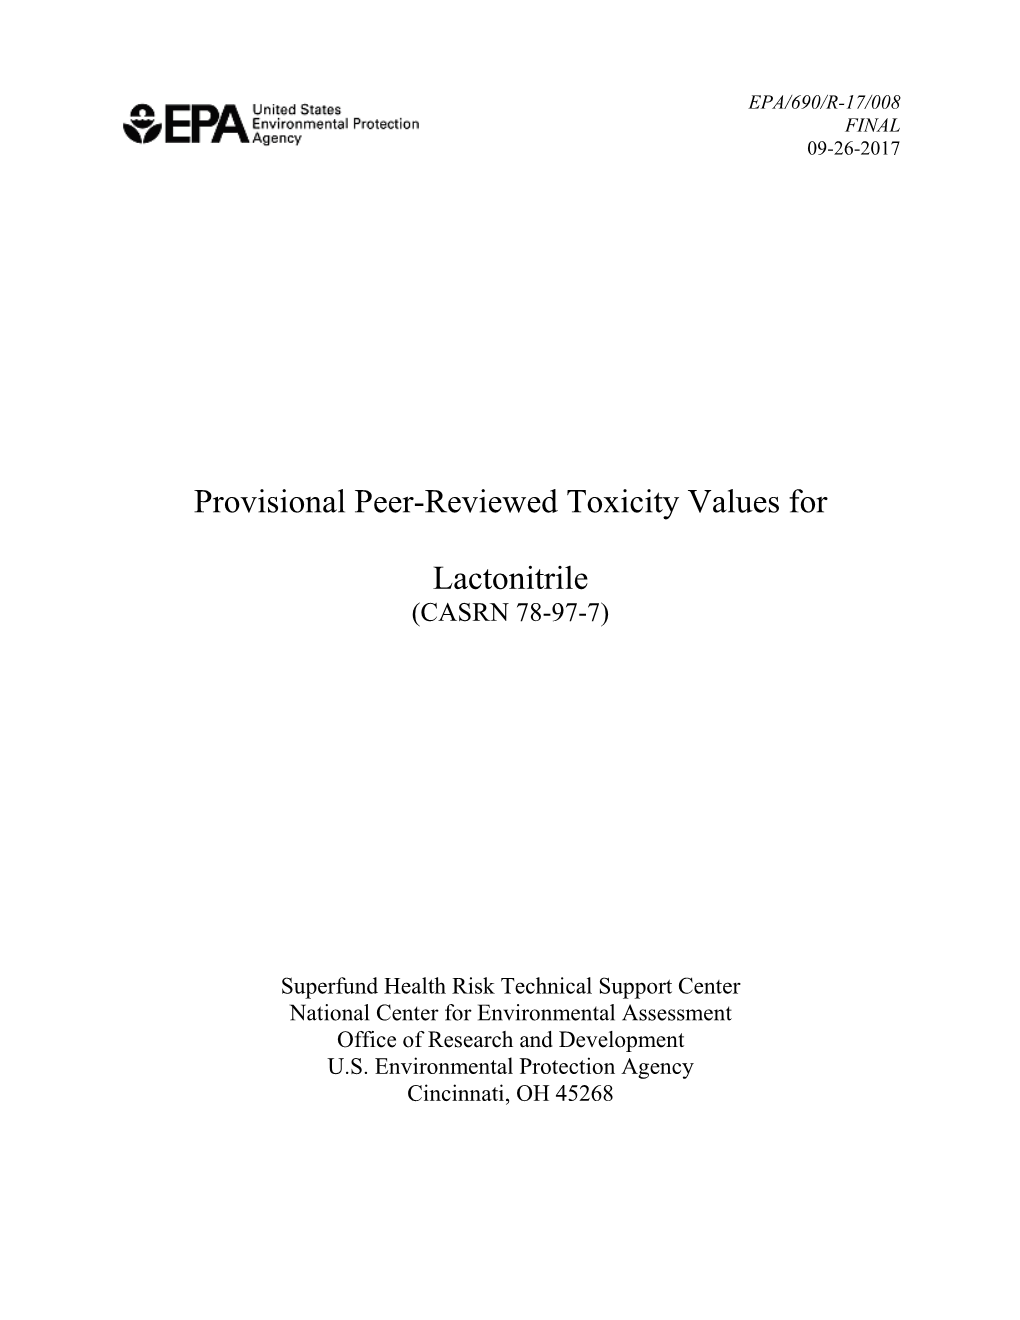 Provisional Peer-Reviewed Toxicity Values for Lactonitrile (Casrn 78-97-7)